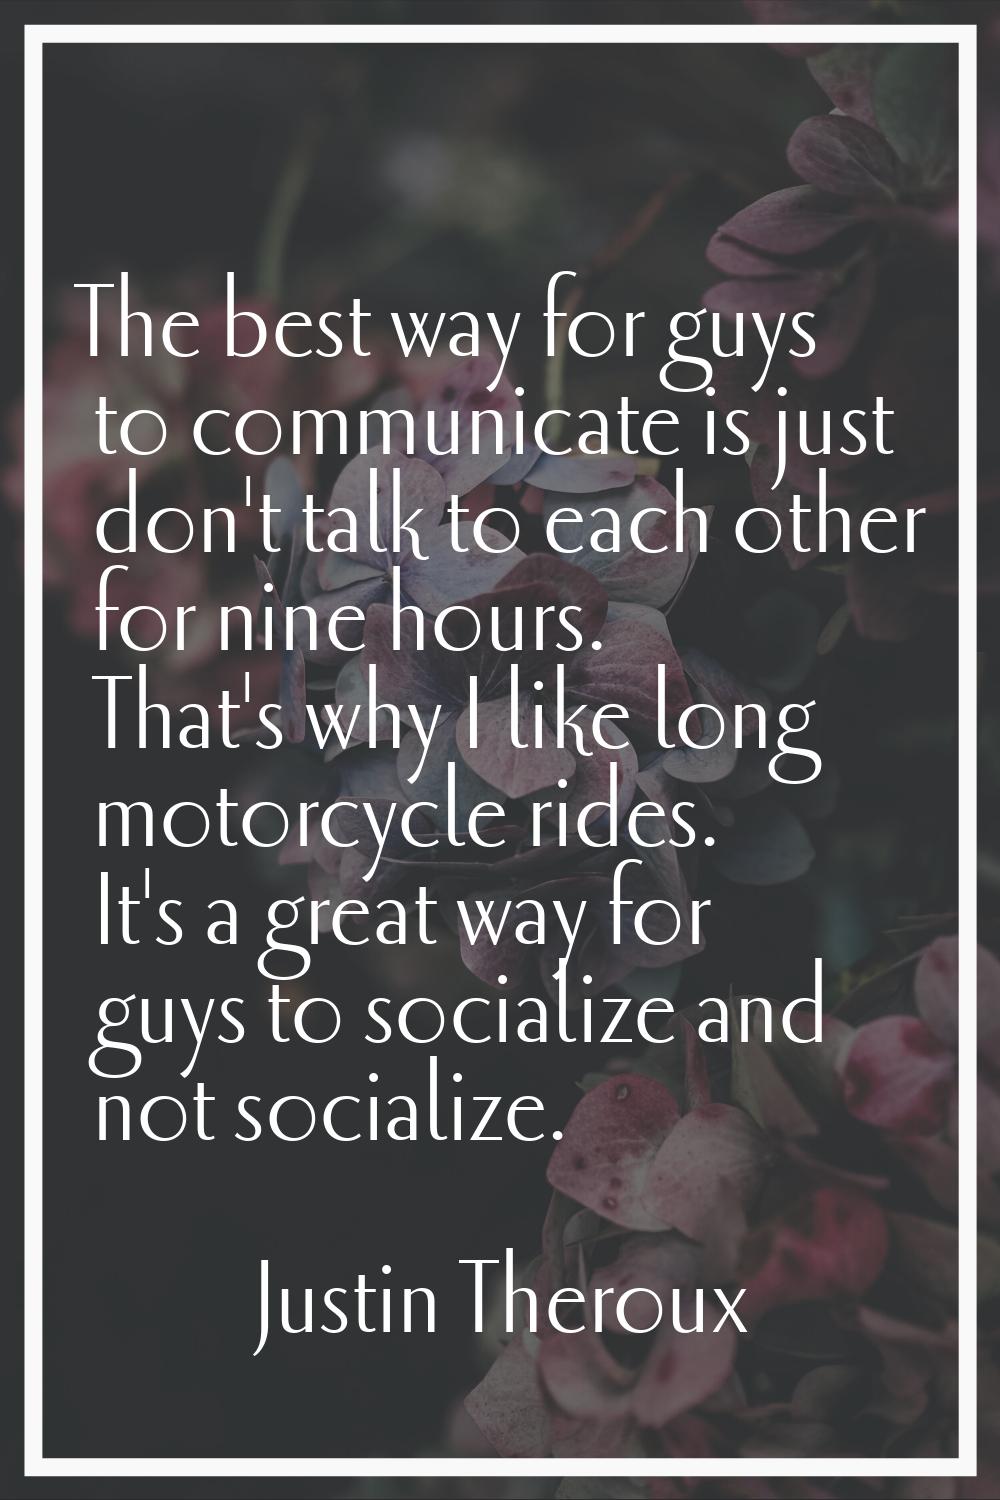 The best way for guys to communicate is just don't talk to each other for nine hours. That's why I 